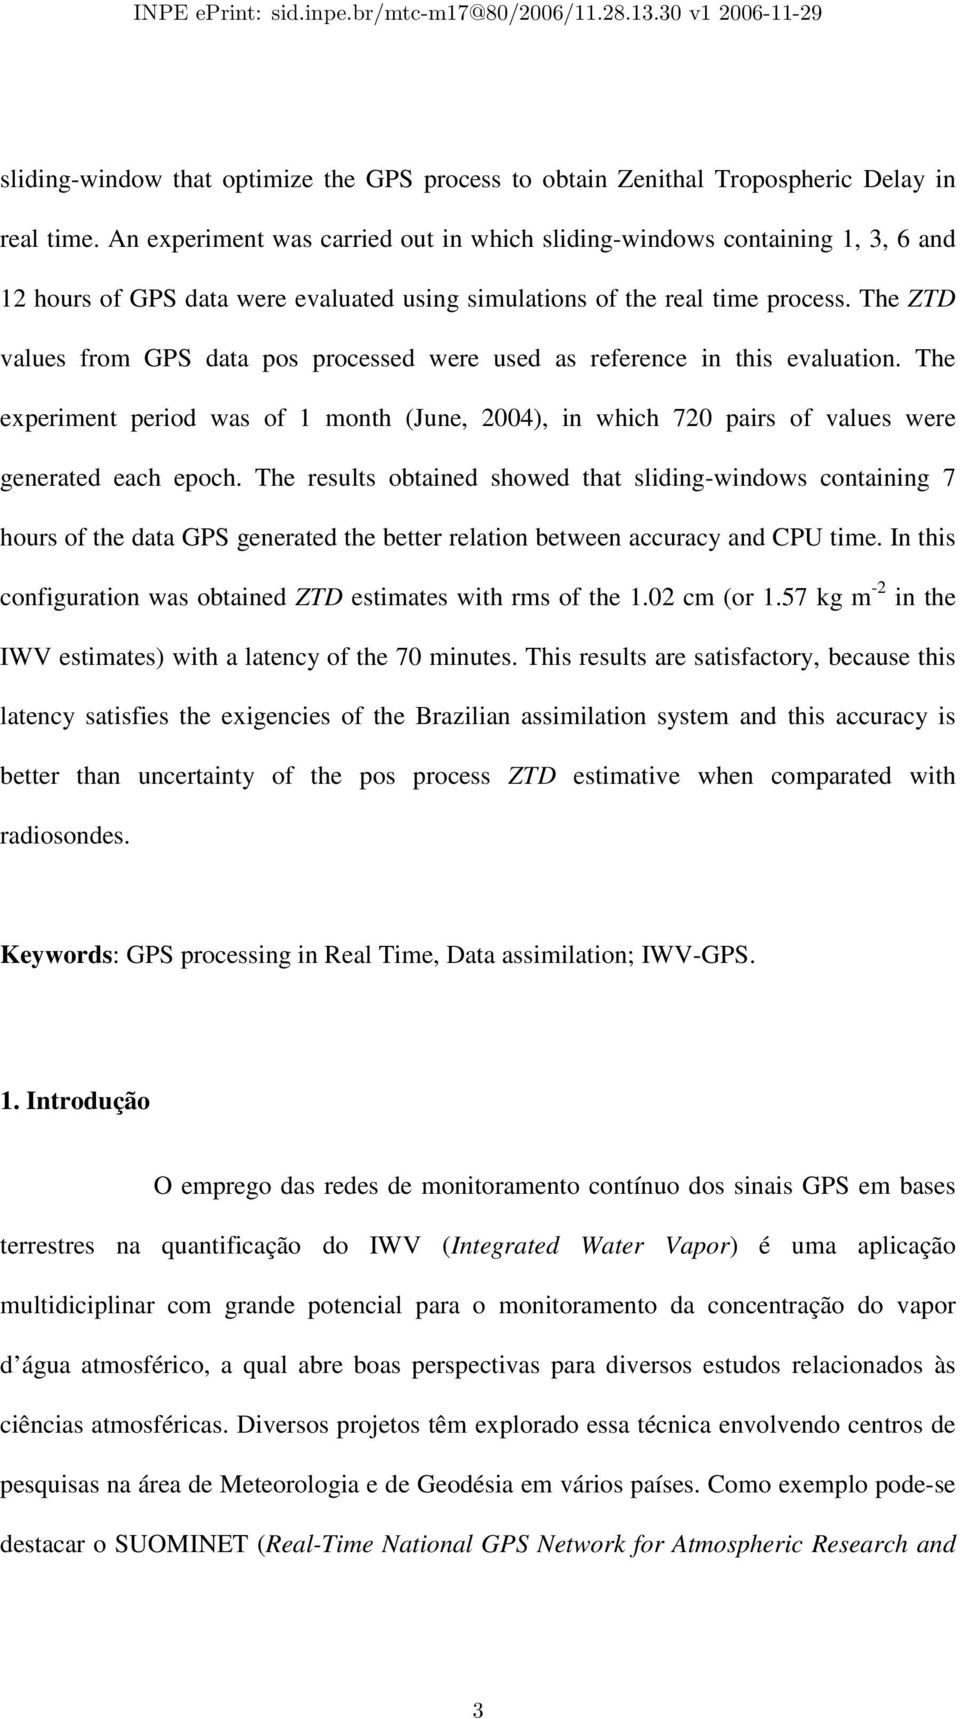 The ZTD values from GPS data pos processed were used as reference in this evaluation. The experiment period was of 1 month (June, 2004), in which 720 pairs of values were generated each epoch.